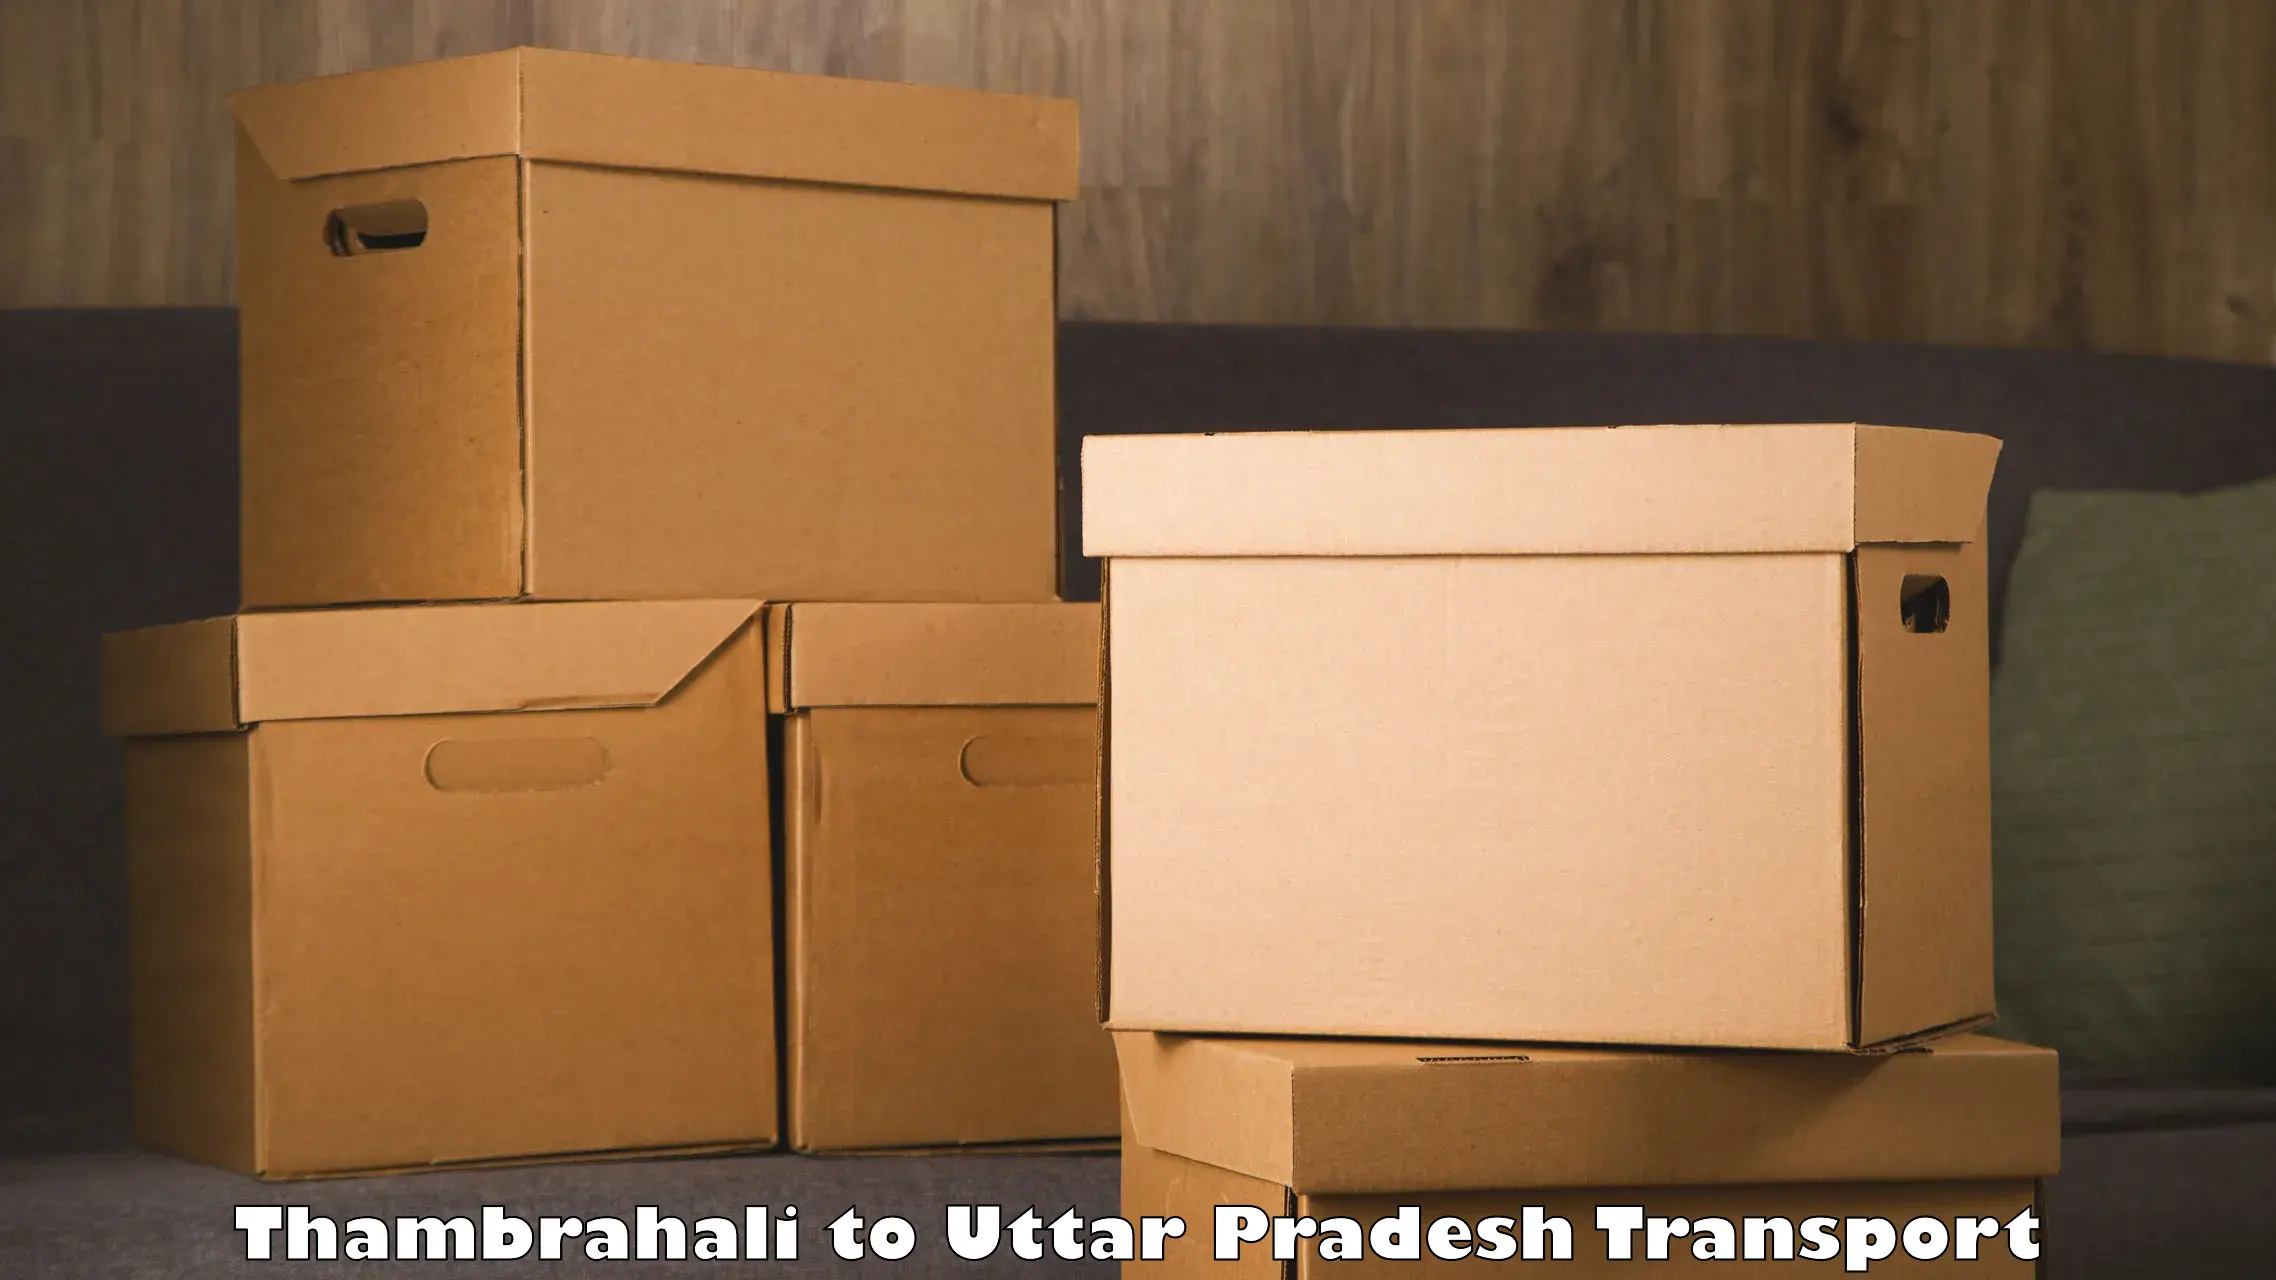 Truck transport companies in India Thambrahali to IIT Kanpur